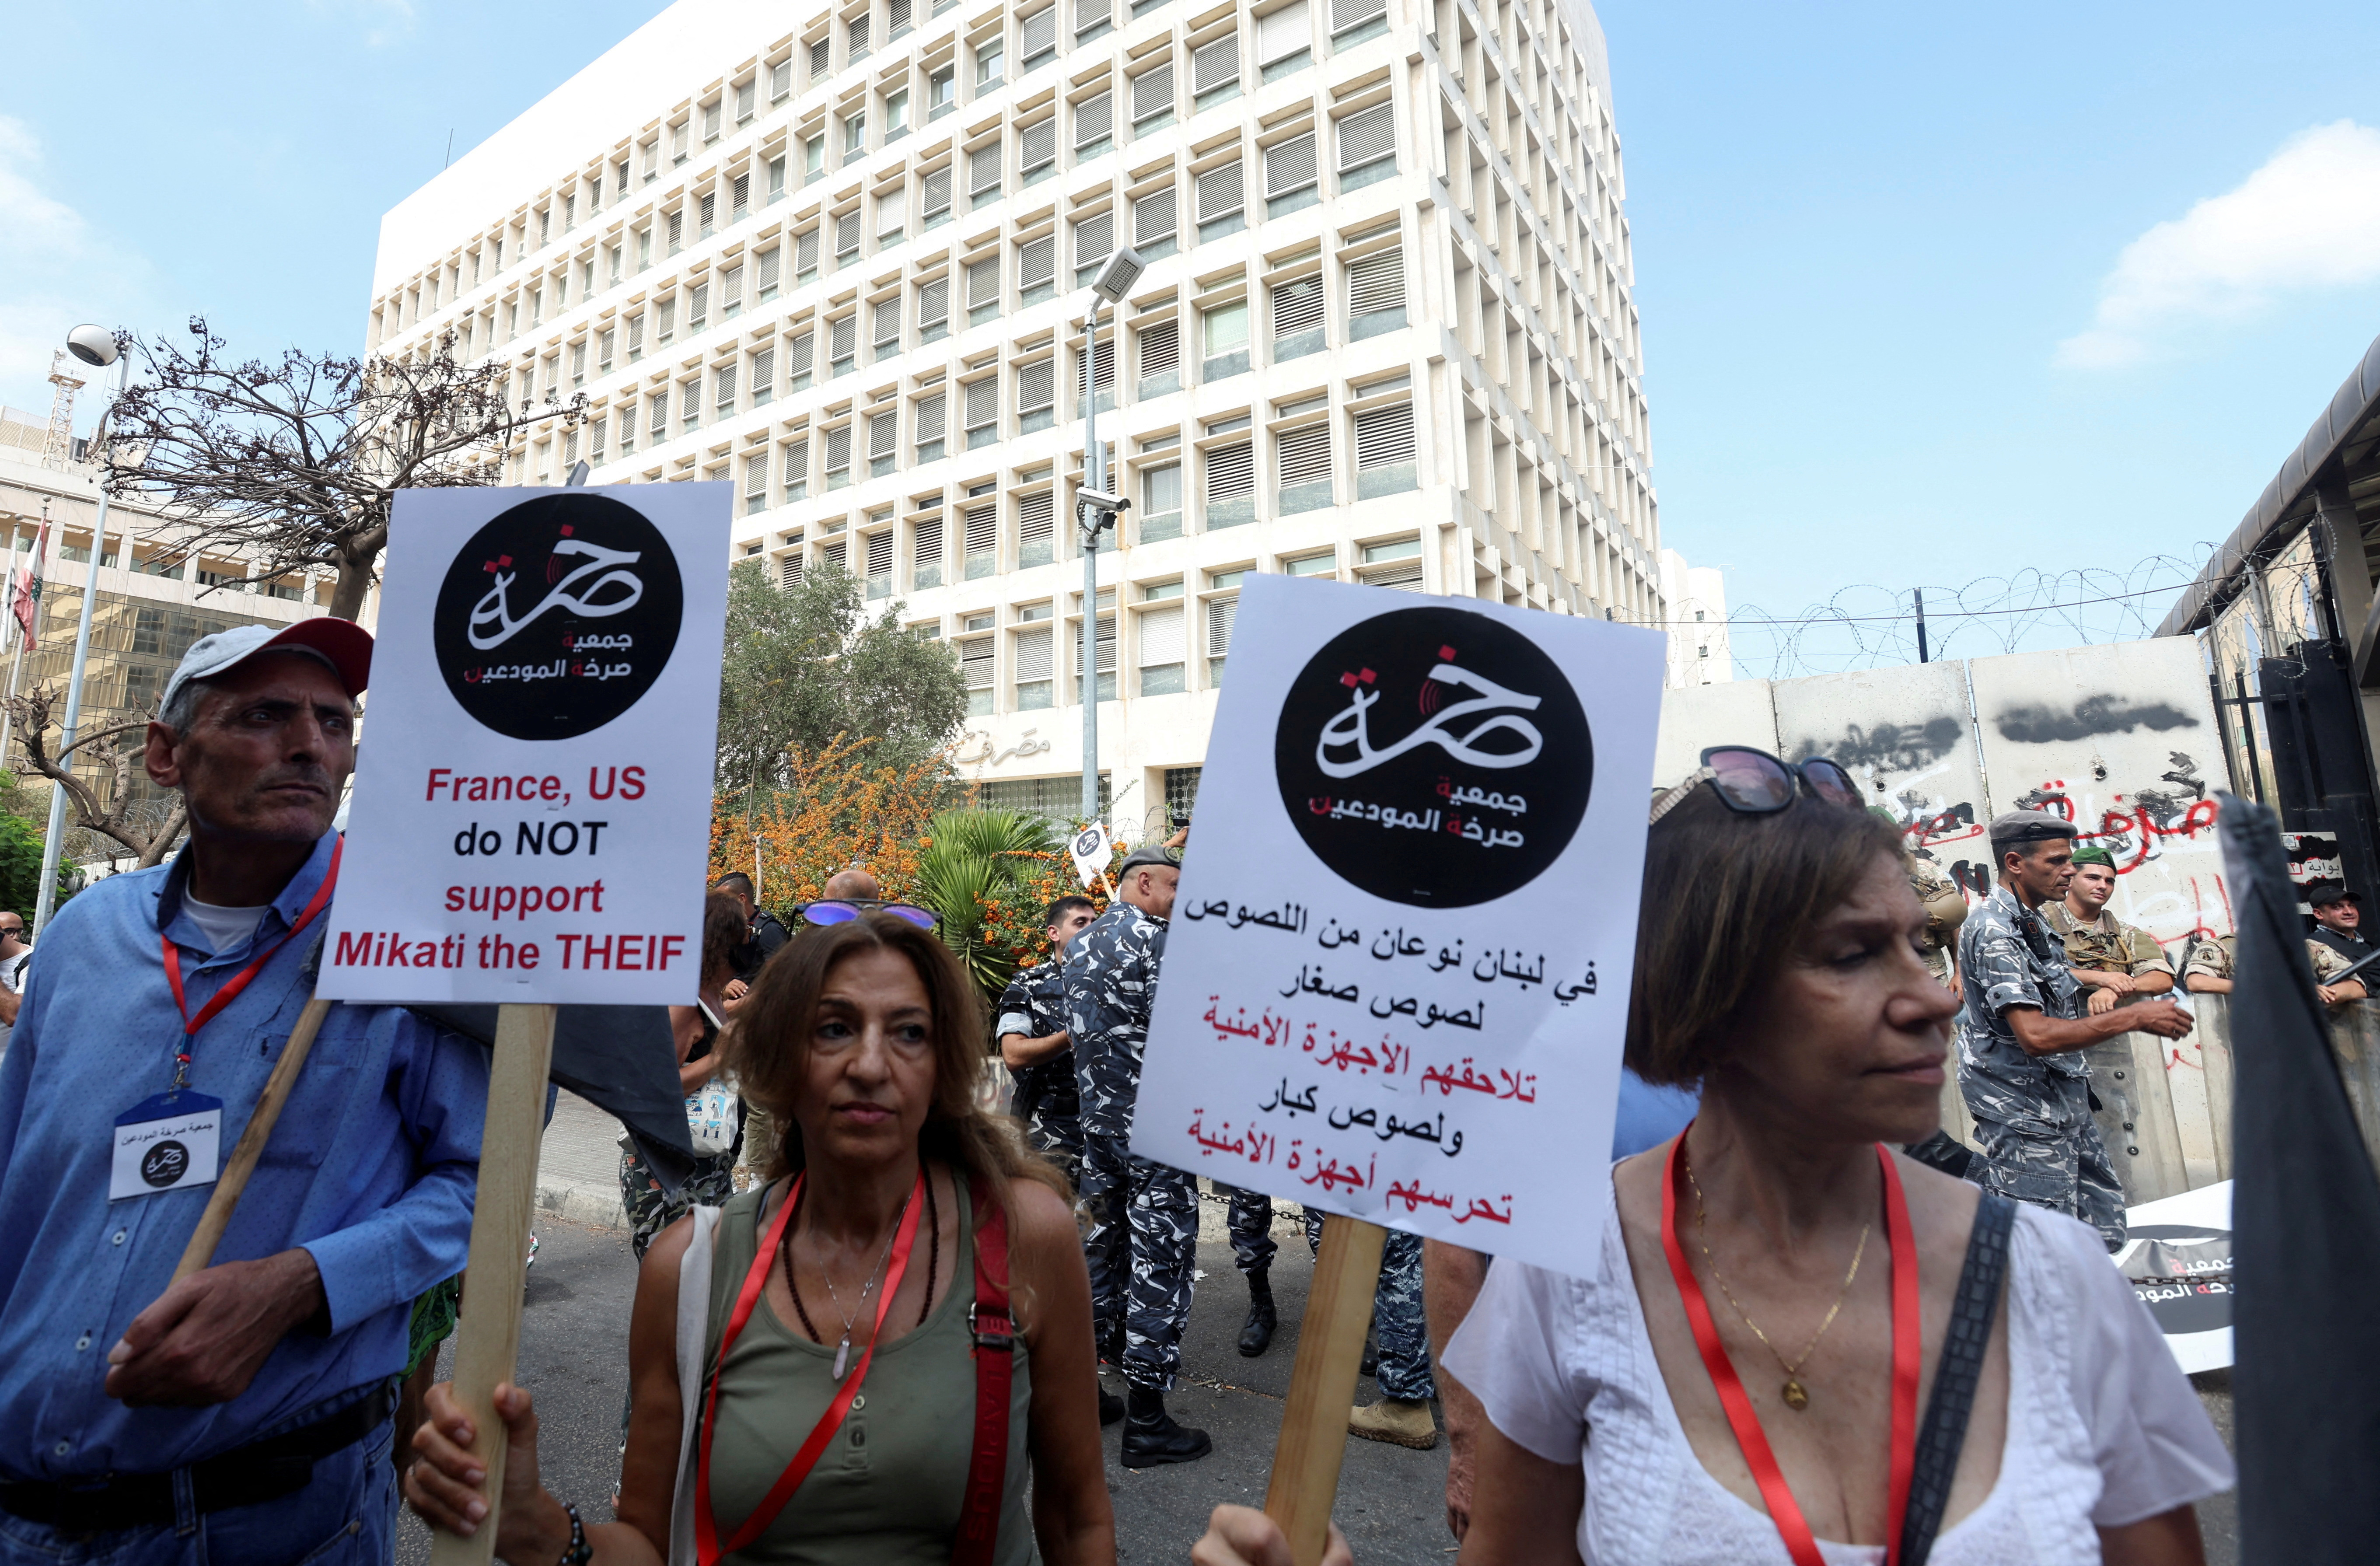 Demonstrators carry banners during a protest near Lebanon's Central Bank building in Beirut